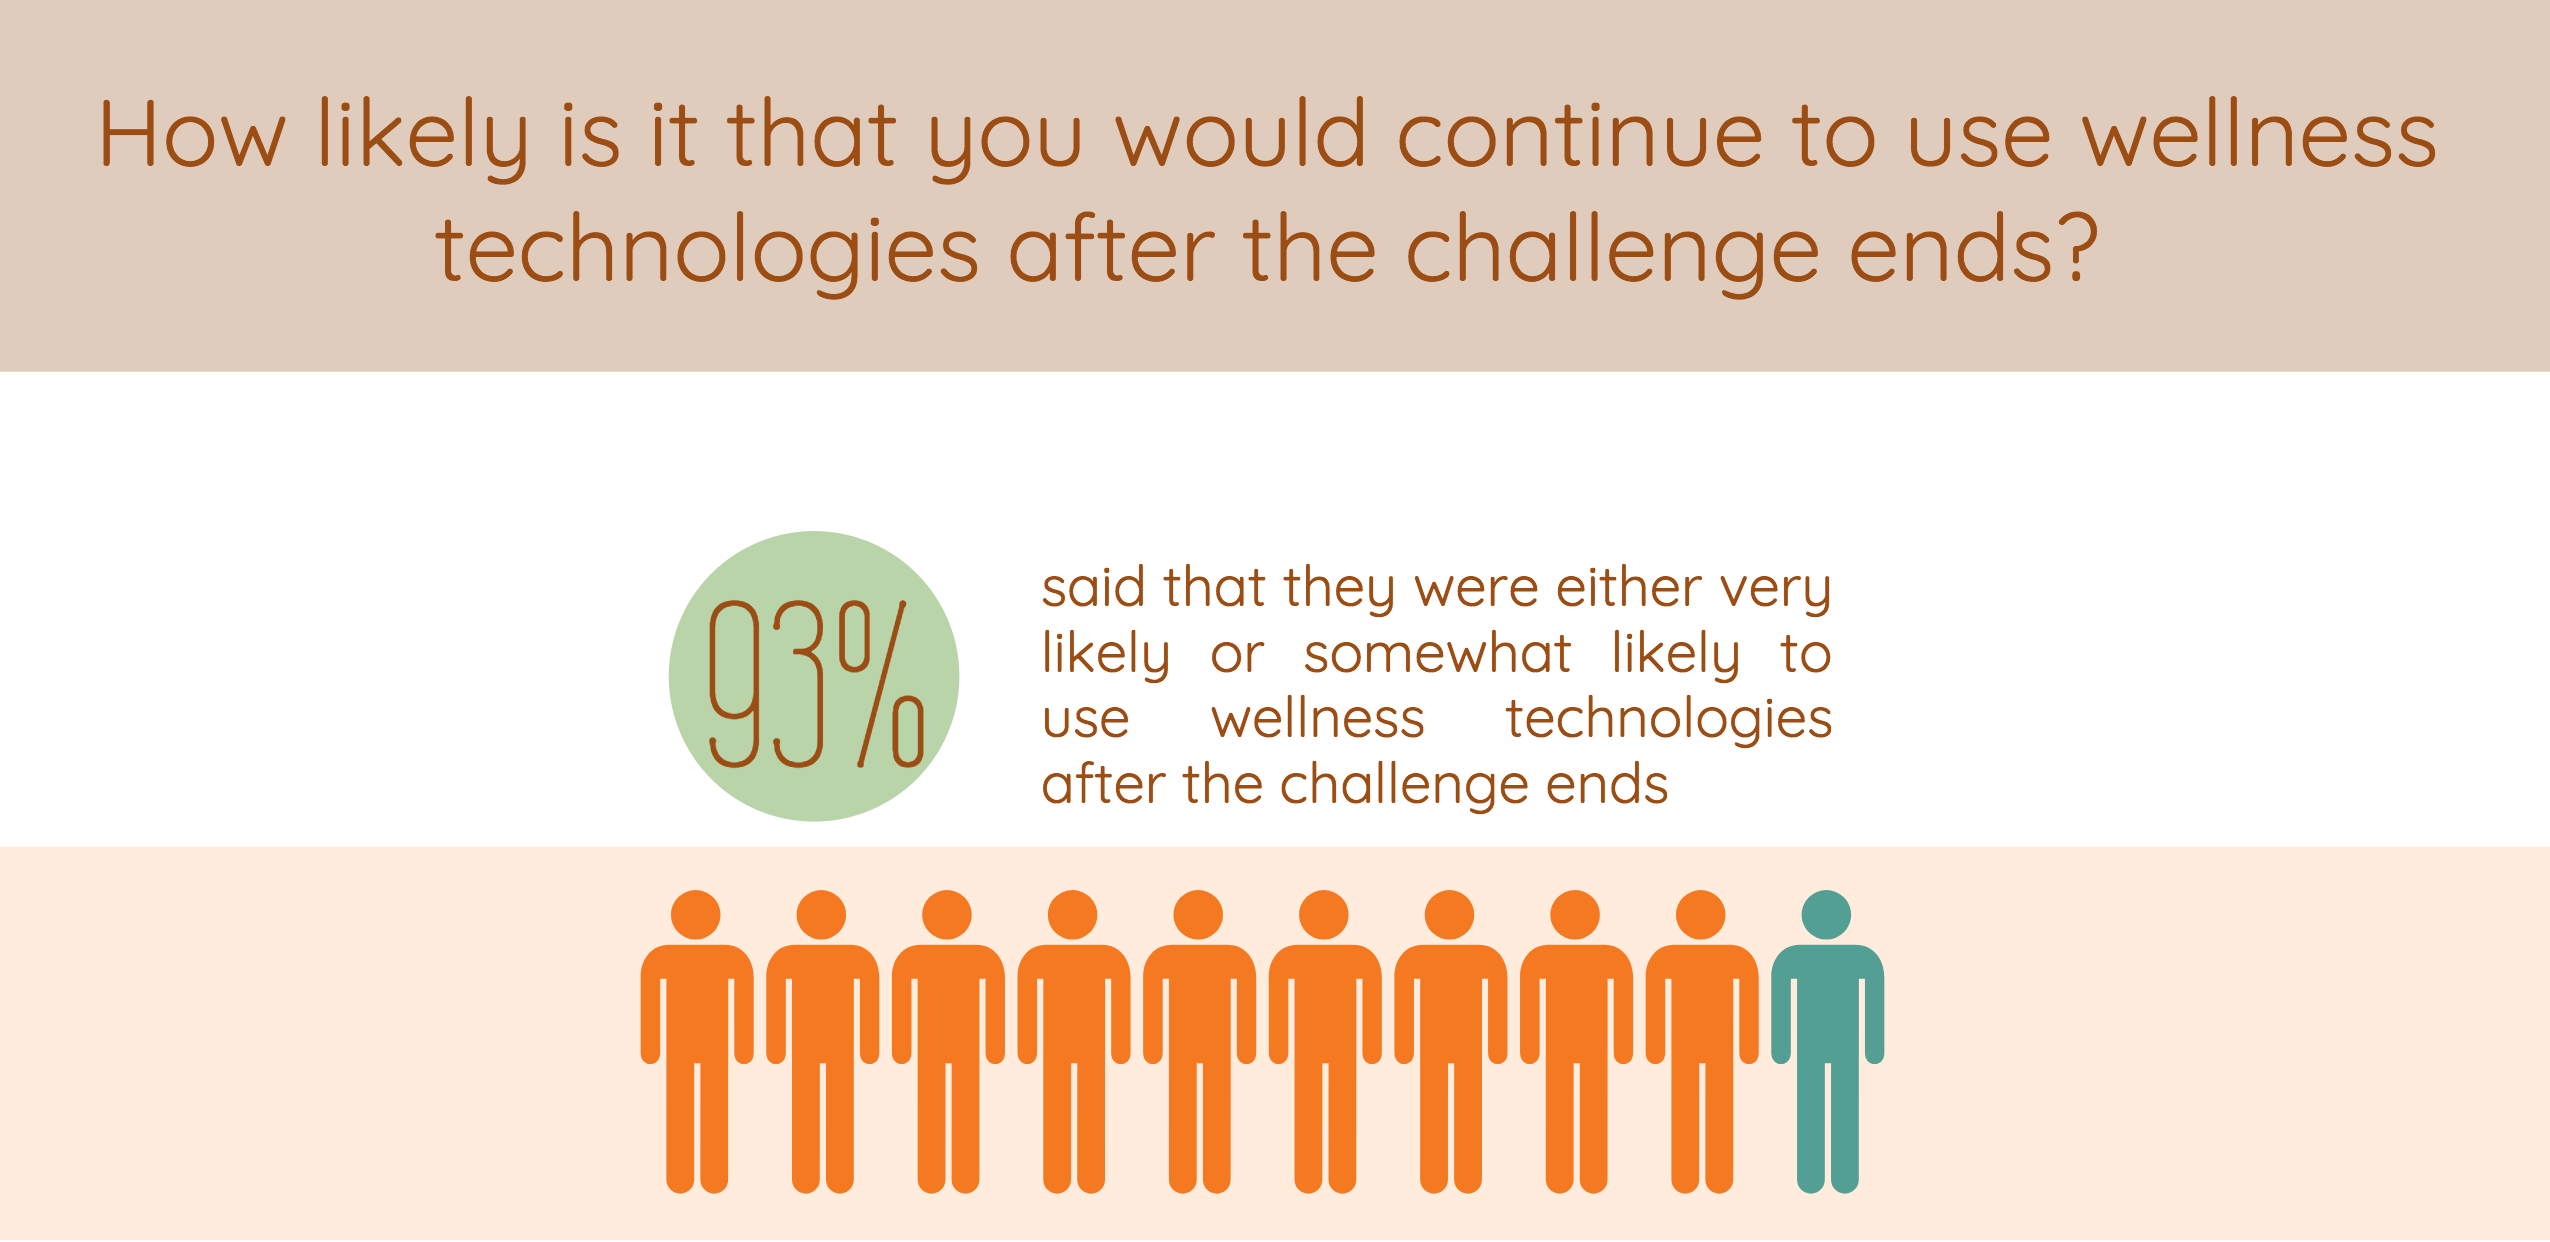 How likely is it that you would continue to use wellness technologies after the challenge ends? 